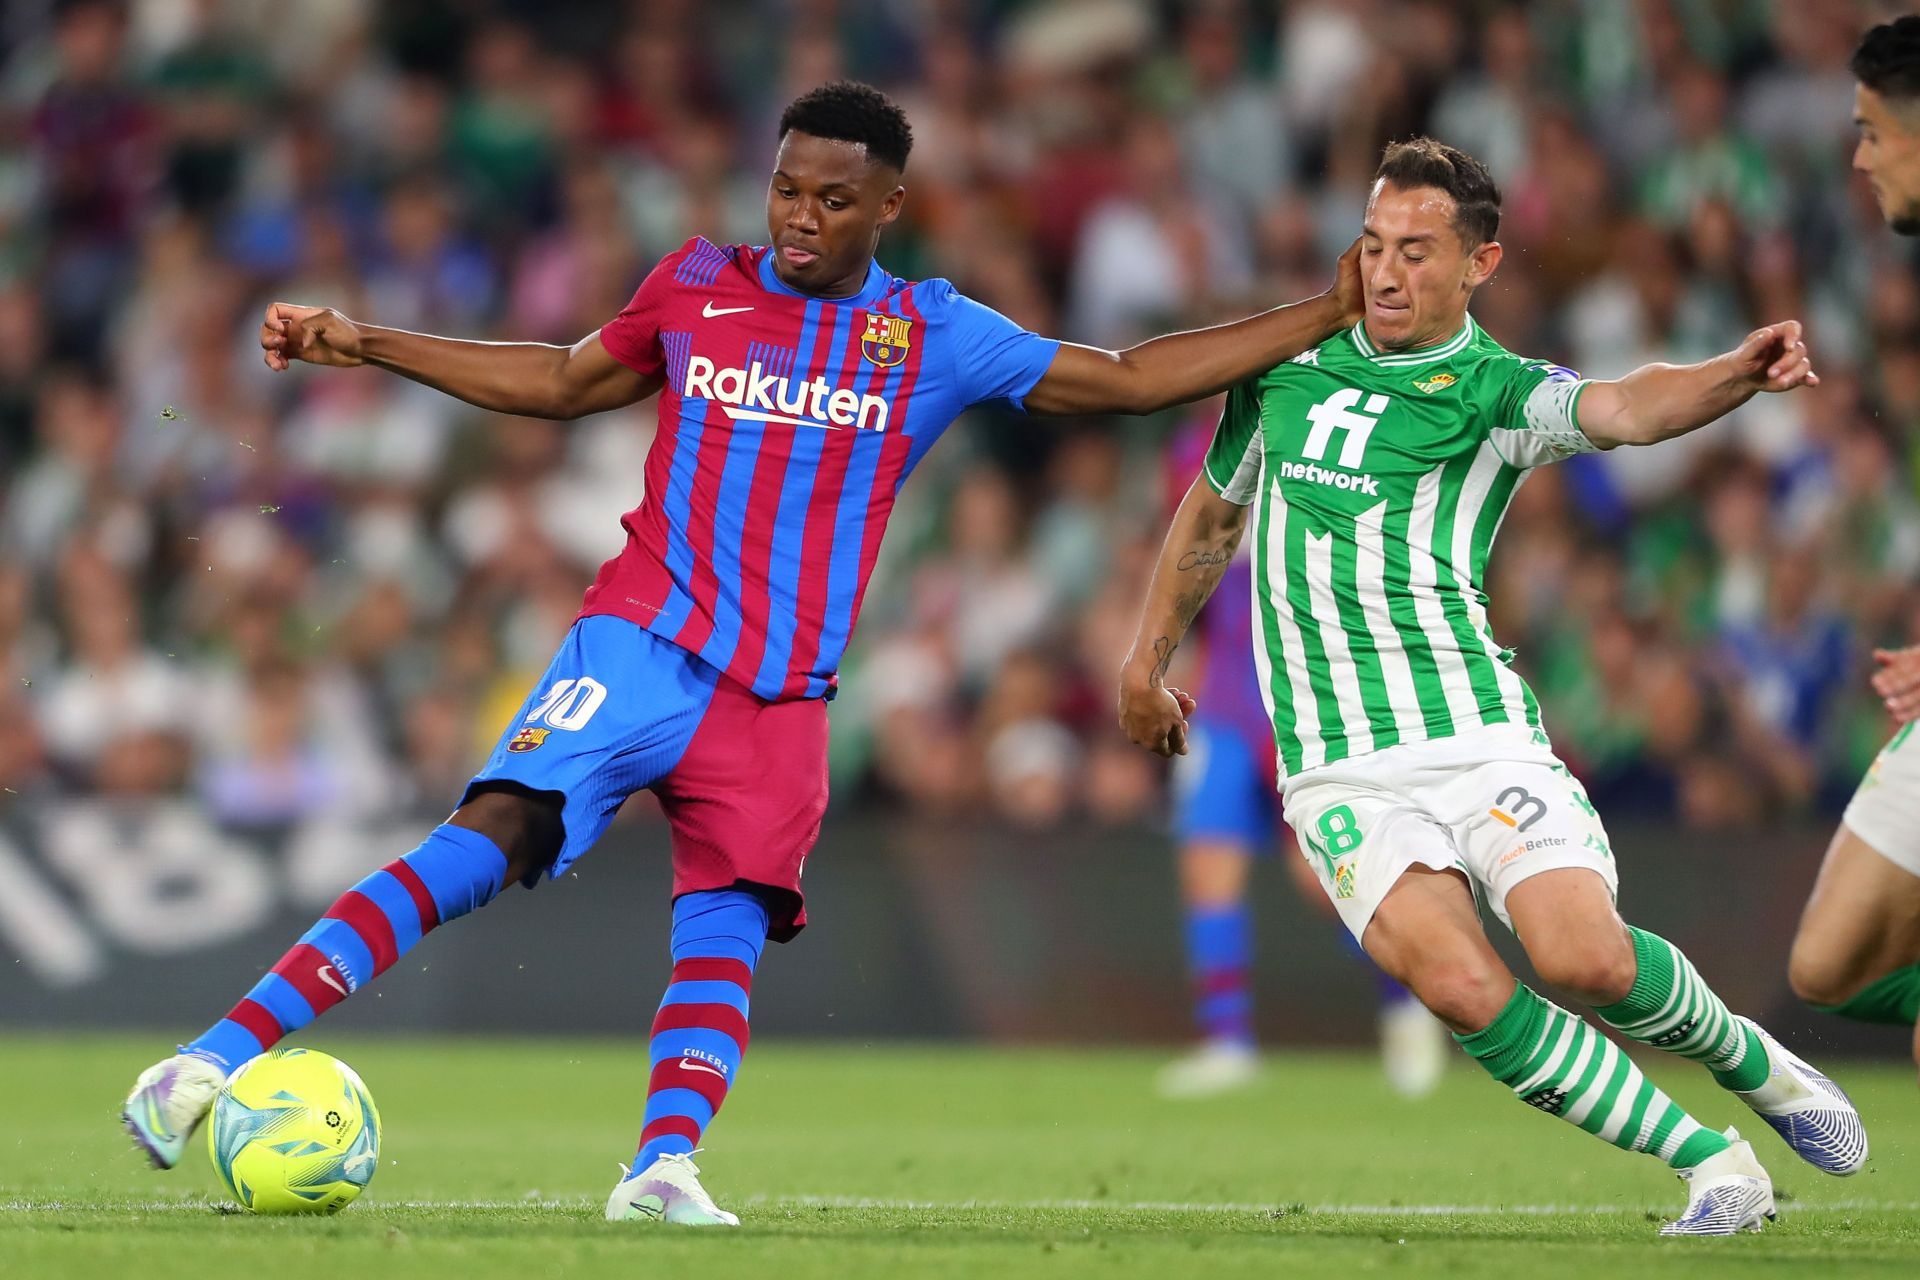 Ansu Fati in action against Real Betis.